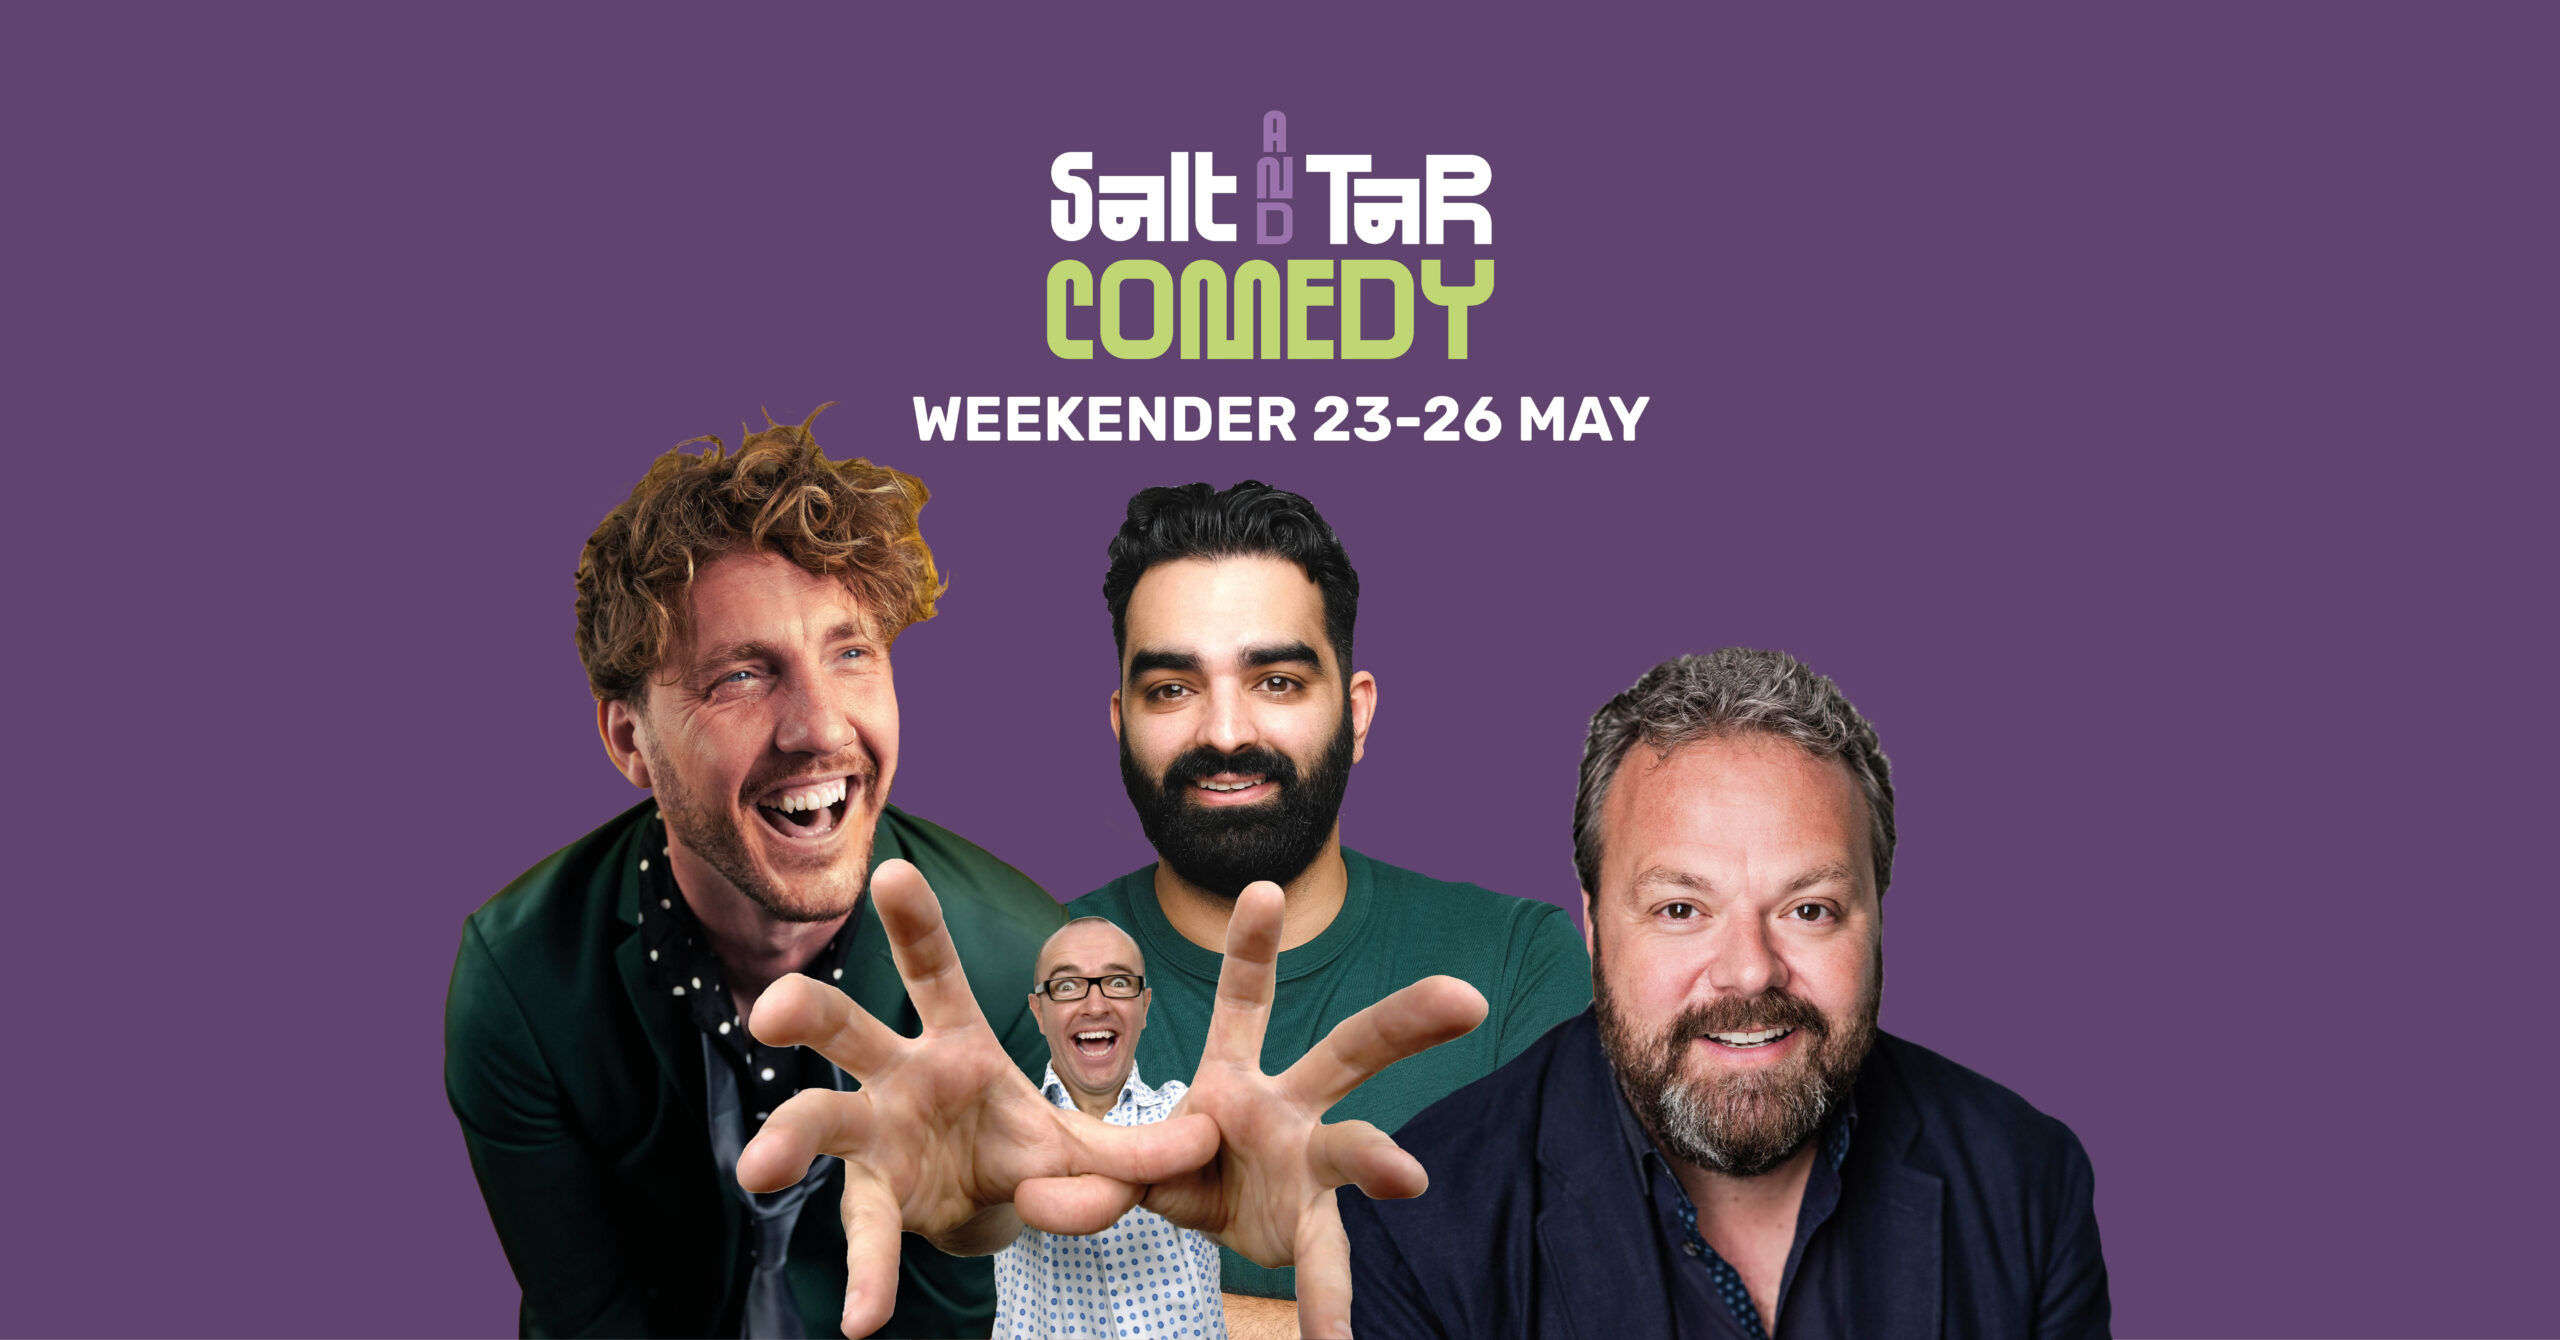 The Salt and Tar Comedy Weekender in Bootle 